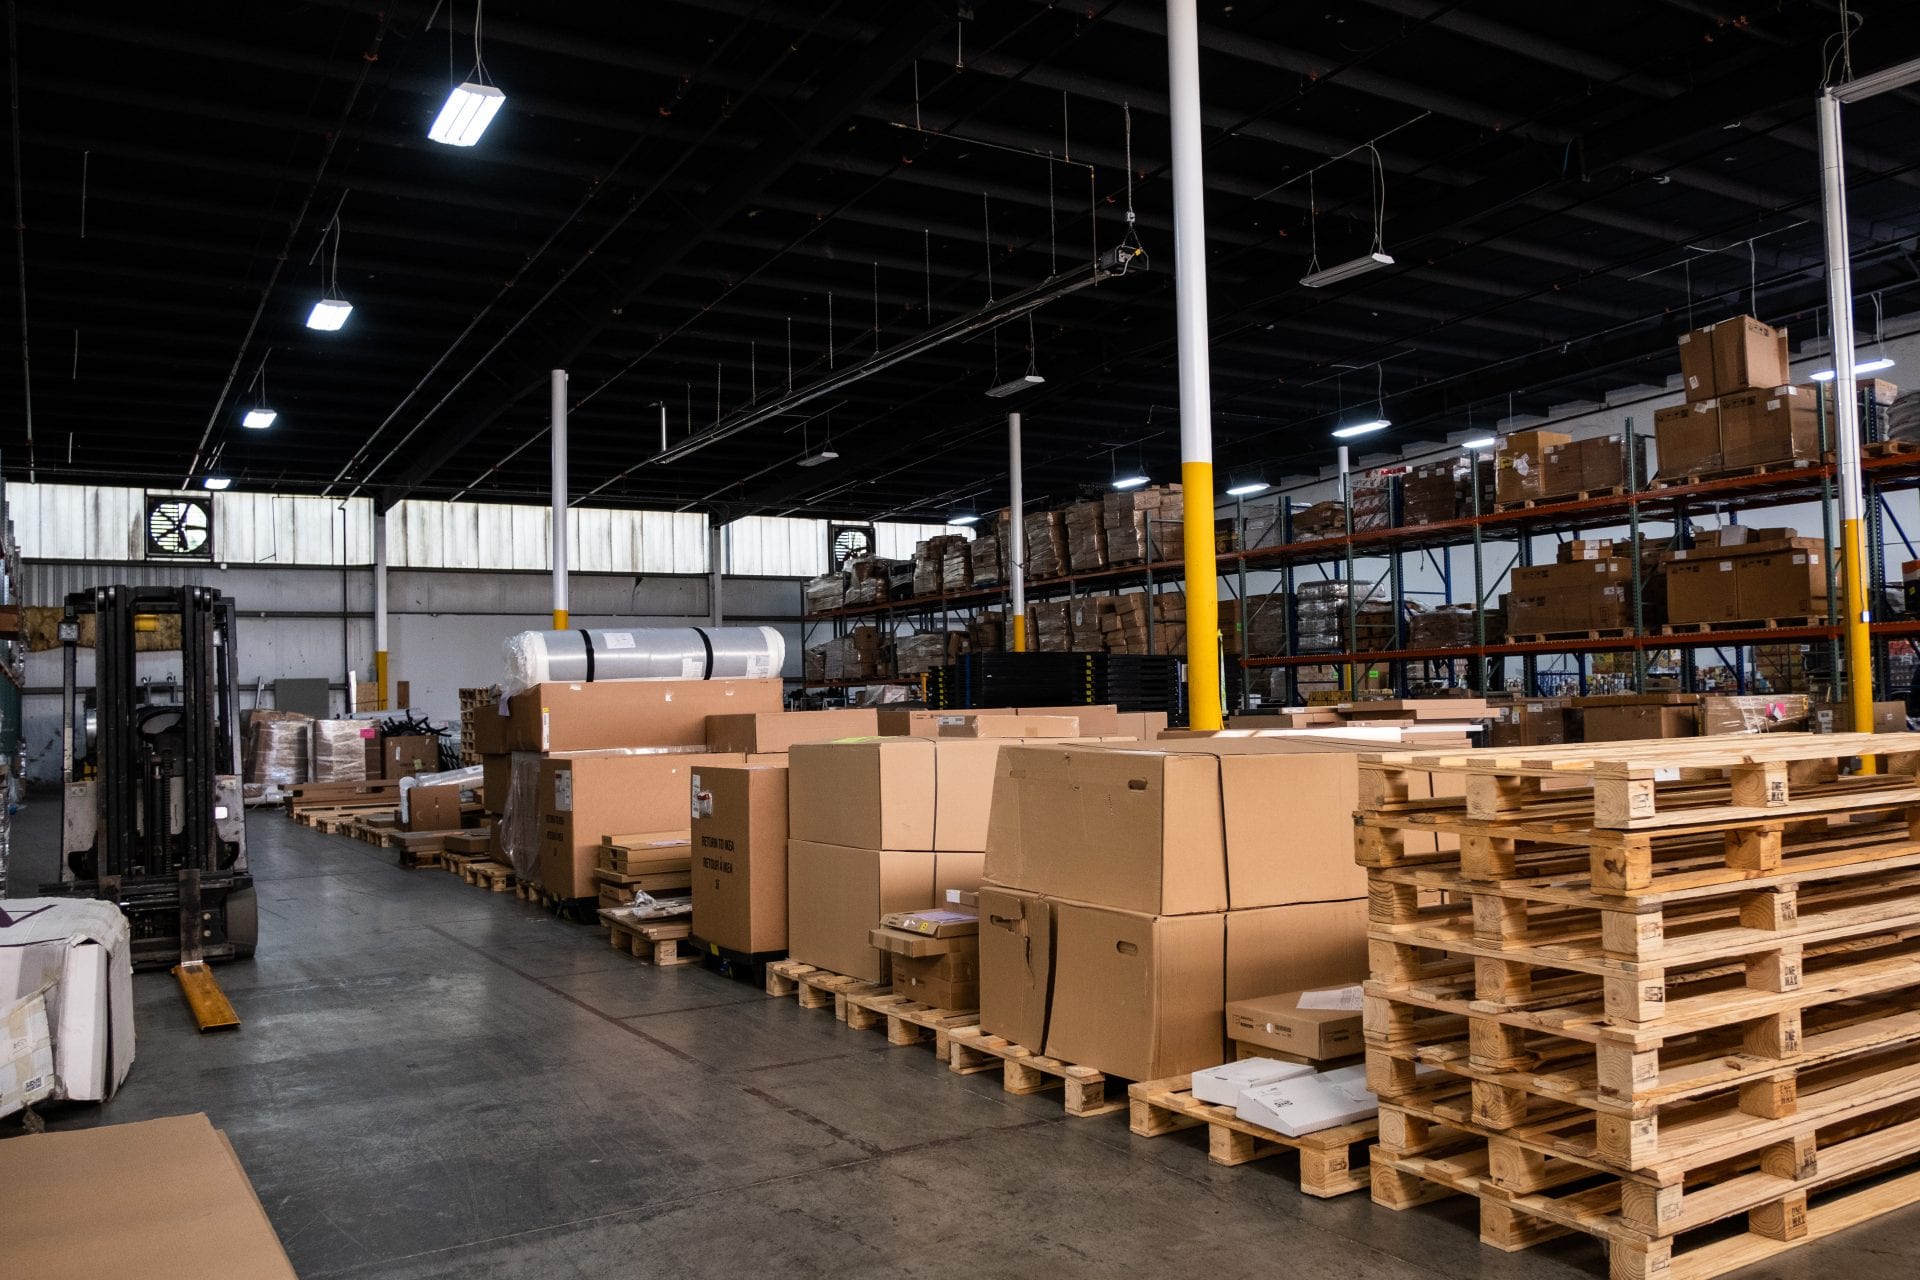 Warehouse and Fulfillment Center Nashville TN providing Shipping Services along with Business and Commercial Storage with Cross Docking and kitting services